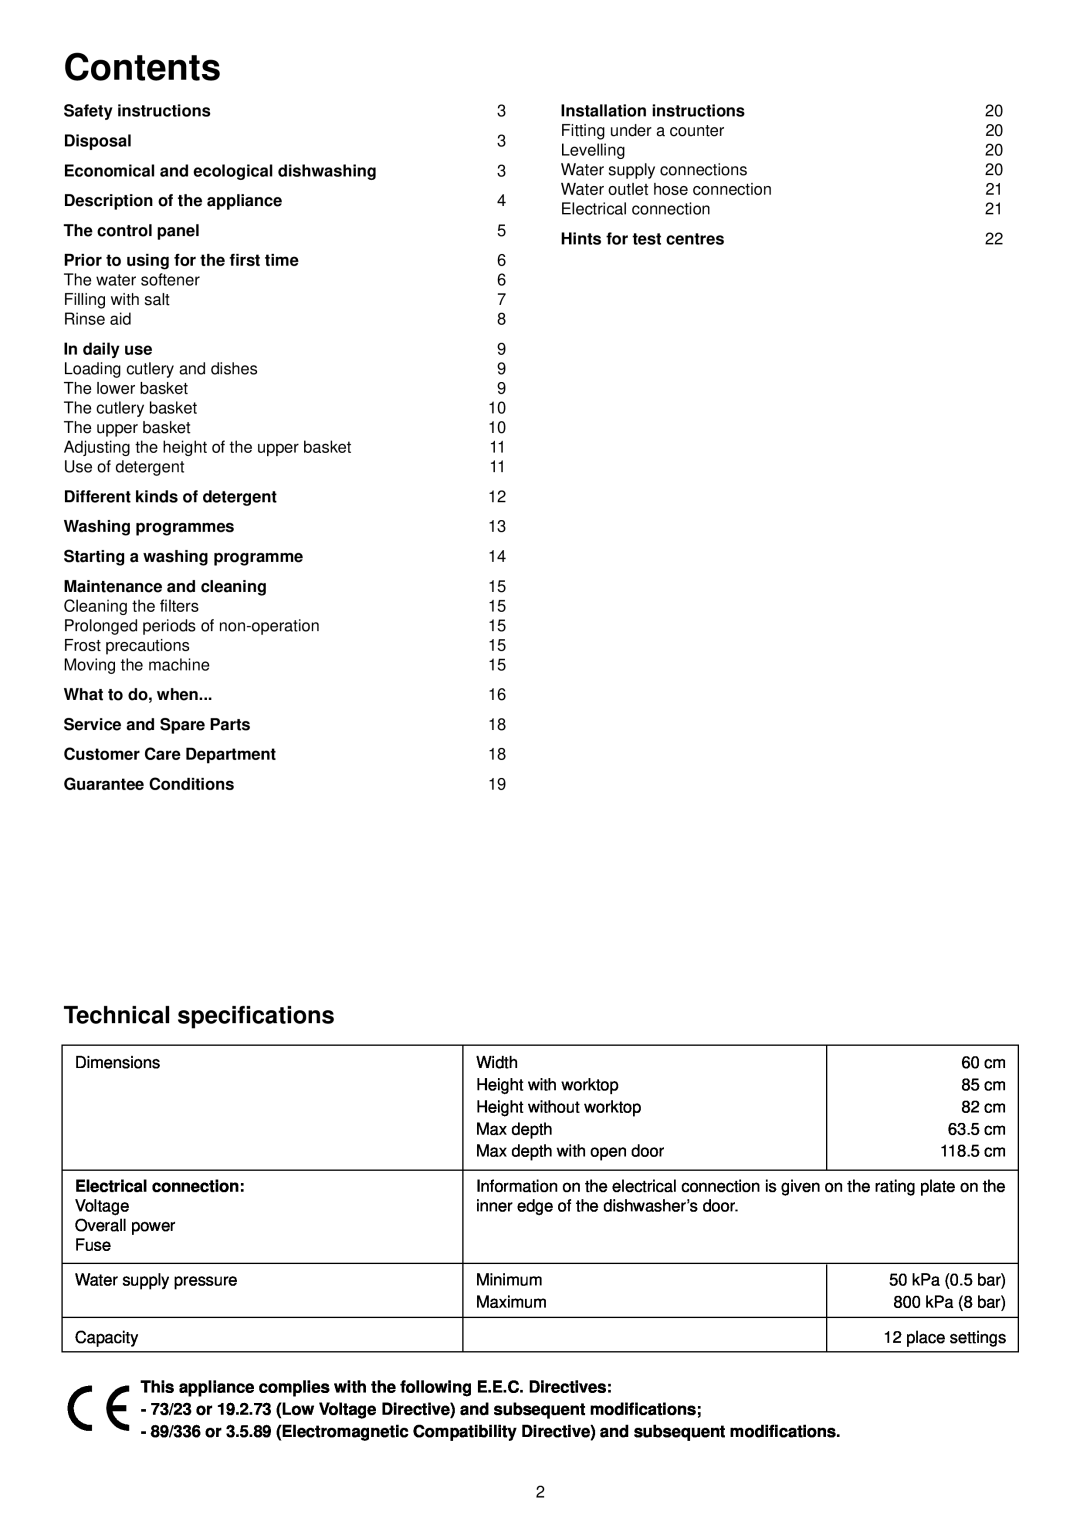 Zanussi ZSF 6152 manual Contents, Technical specifications 